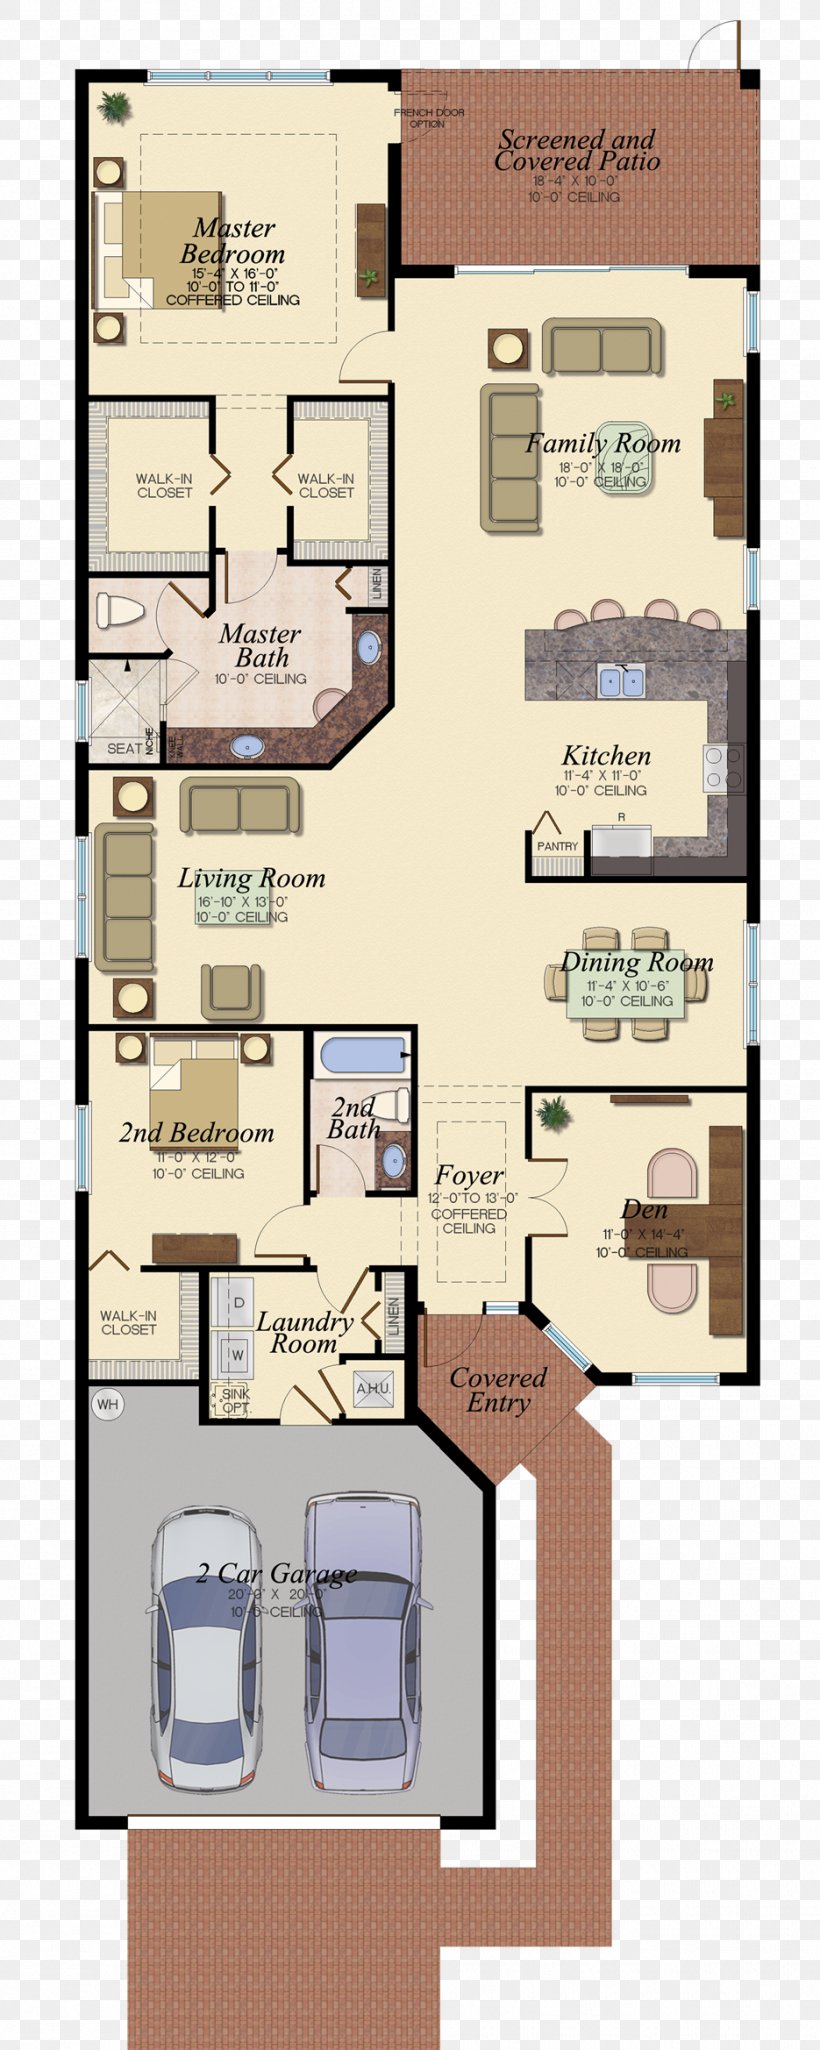 Floor Plan House Plan Architecture, PNG, 935x2338px, Floor Plan, Architecture, Bathroom, Bedroom, Building Download Free